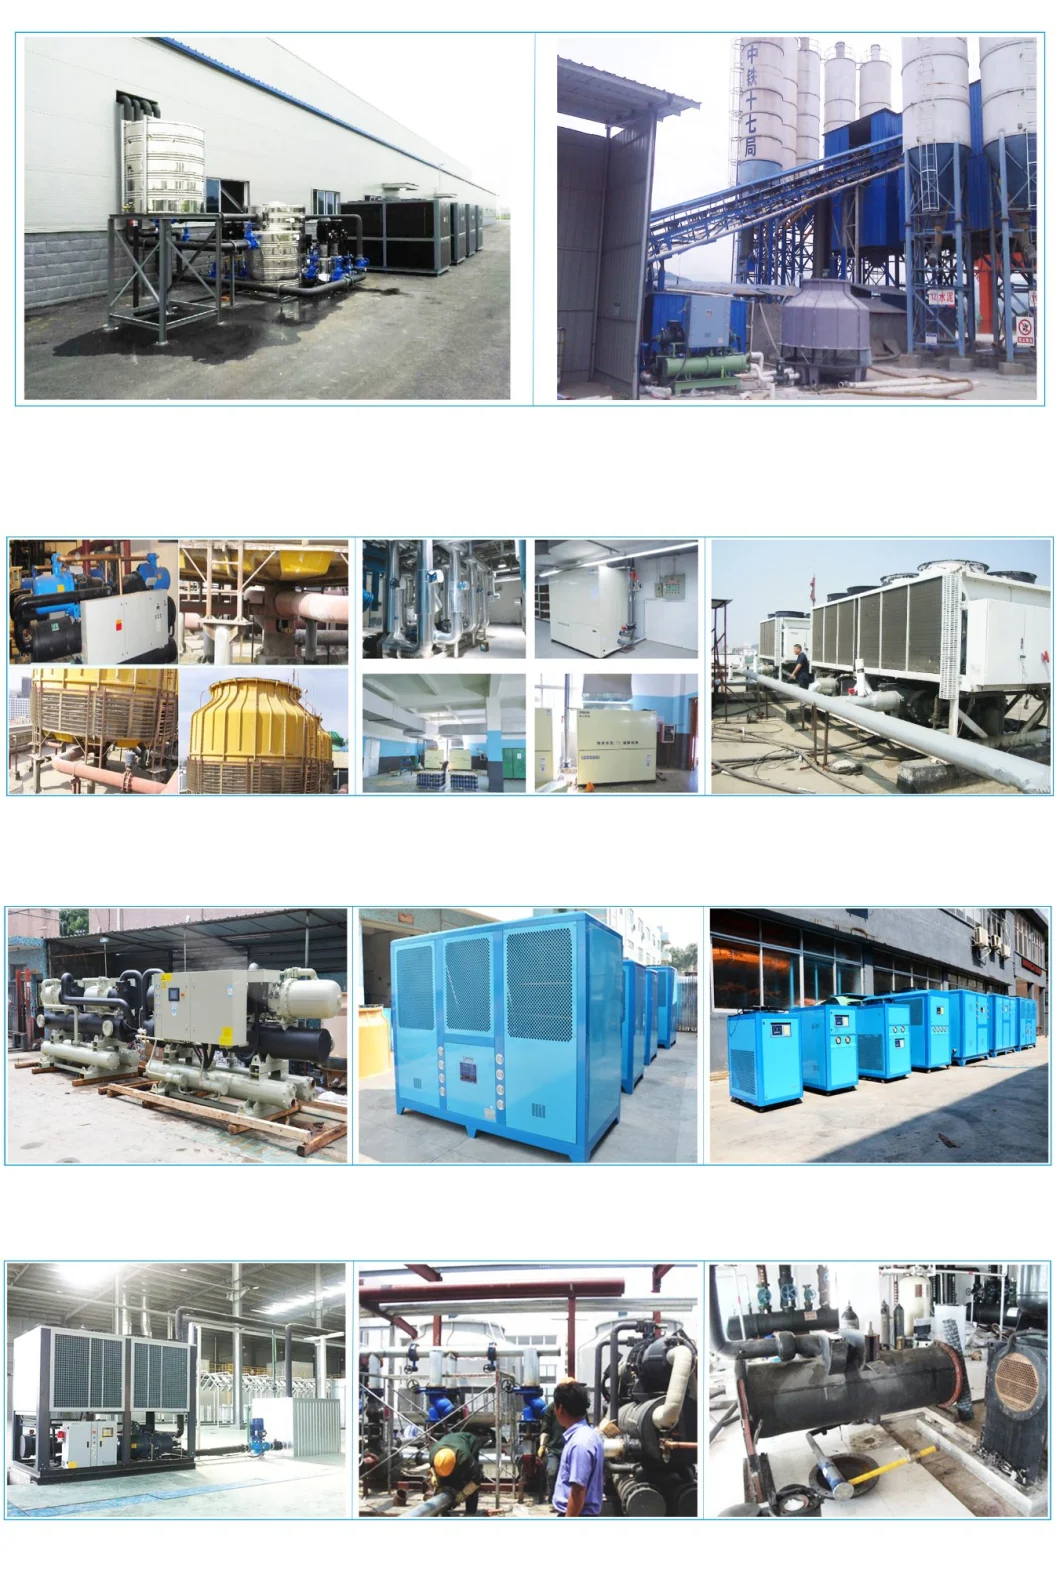 25kw Customizable Industrial Water Tank or Cooling Chiller